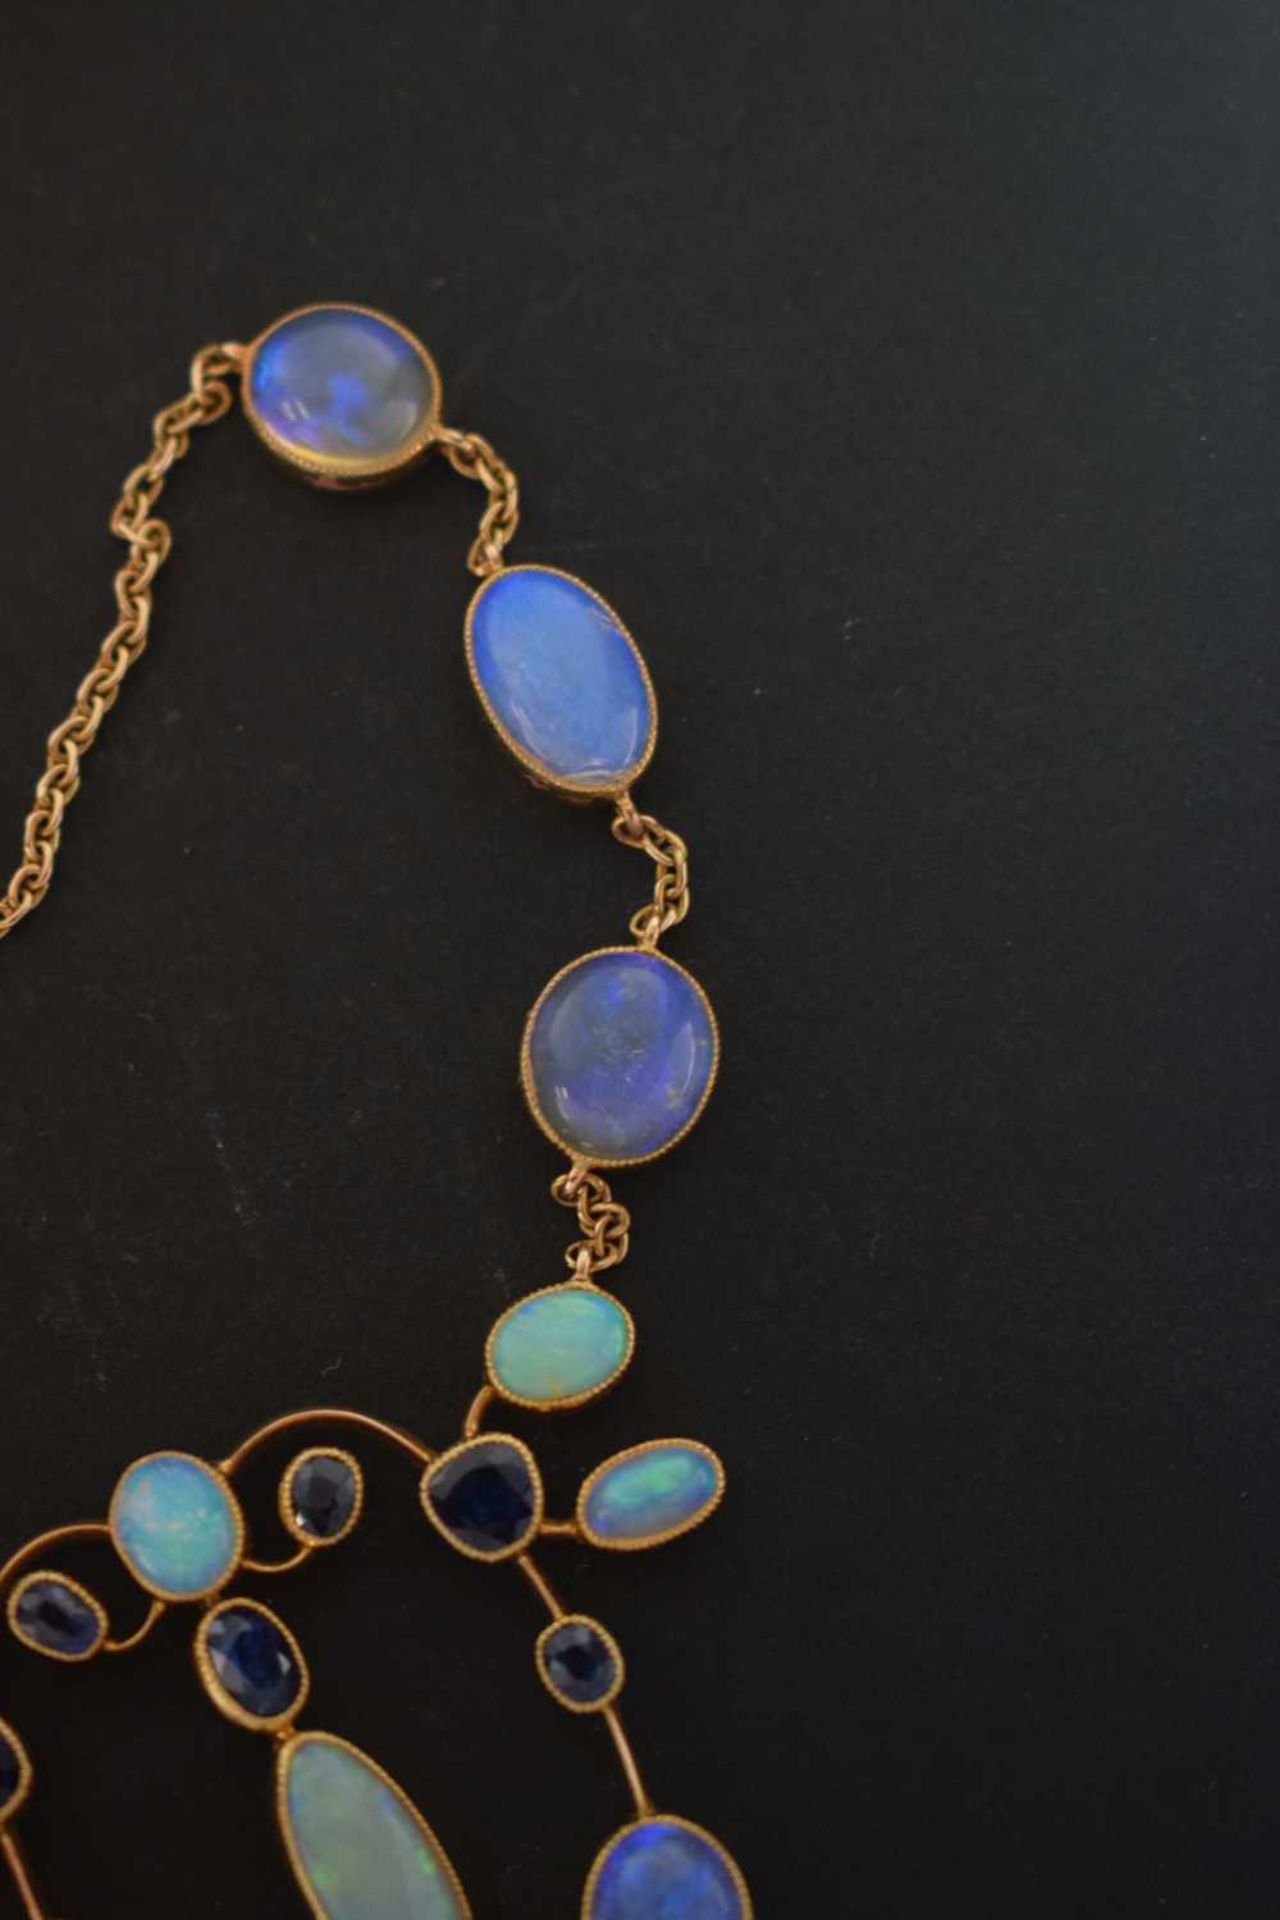 Opal and sapphire pendant necklace in the Arts and Crafts manner - Image 6 of 12